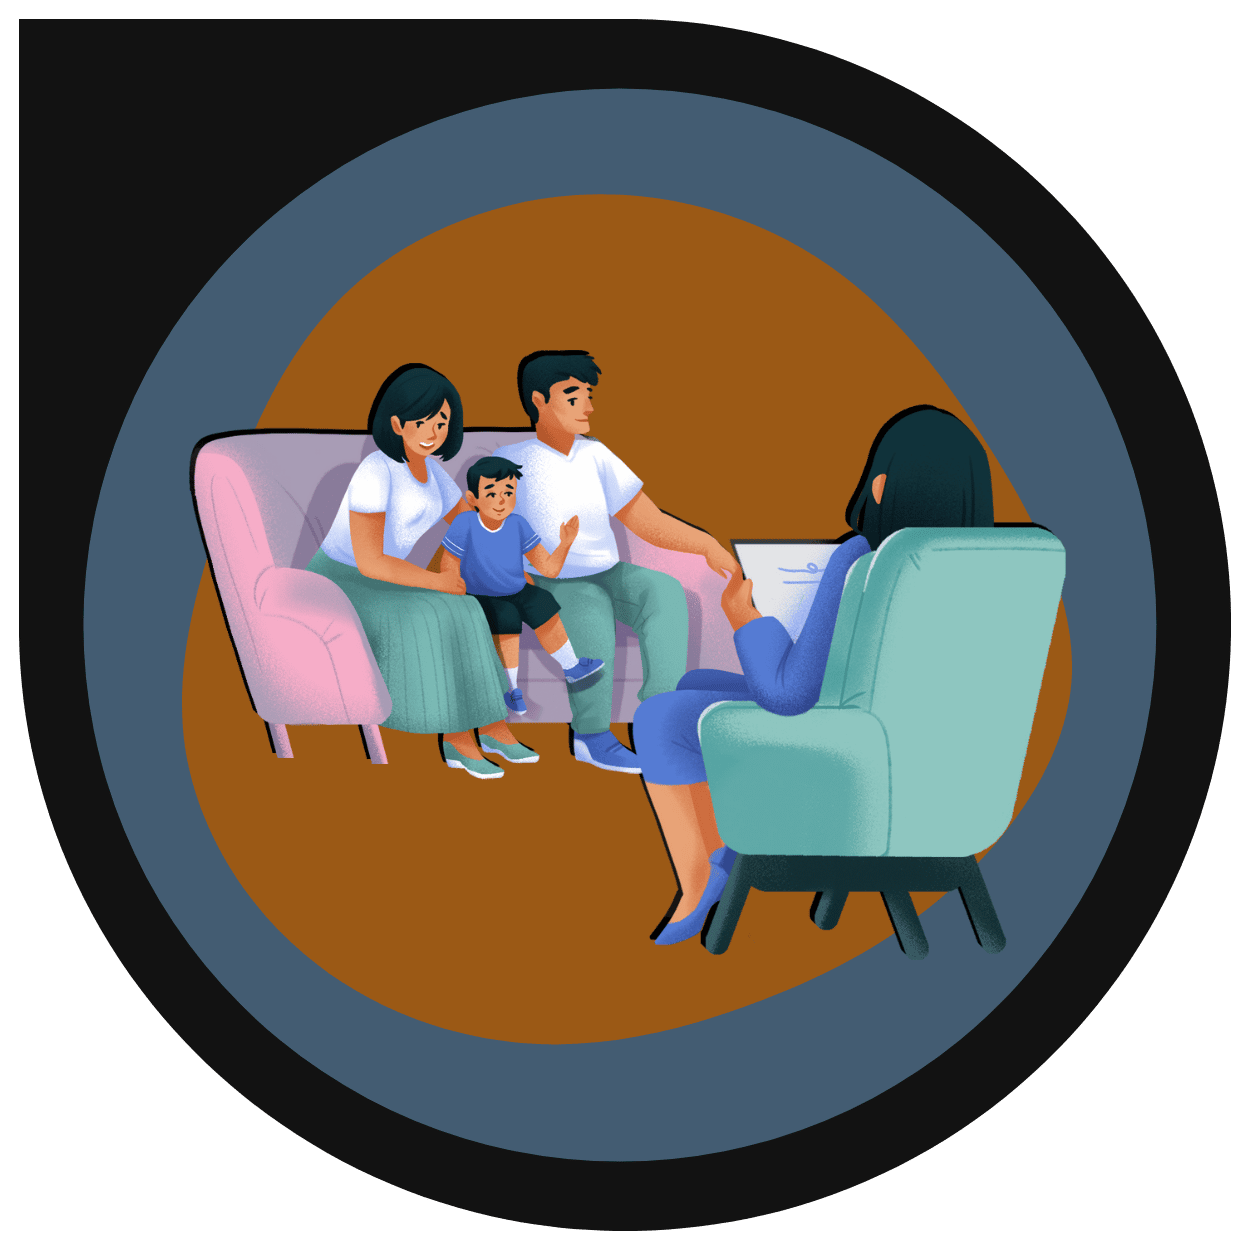 A Sketchily graphic doodle of two brown-skin people, a family of three, talking to someone sitting in a chair. A brown blob separates the graphic from the deep teal and black background.